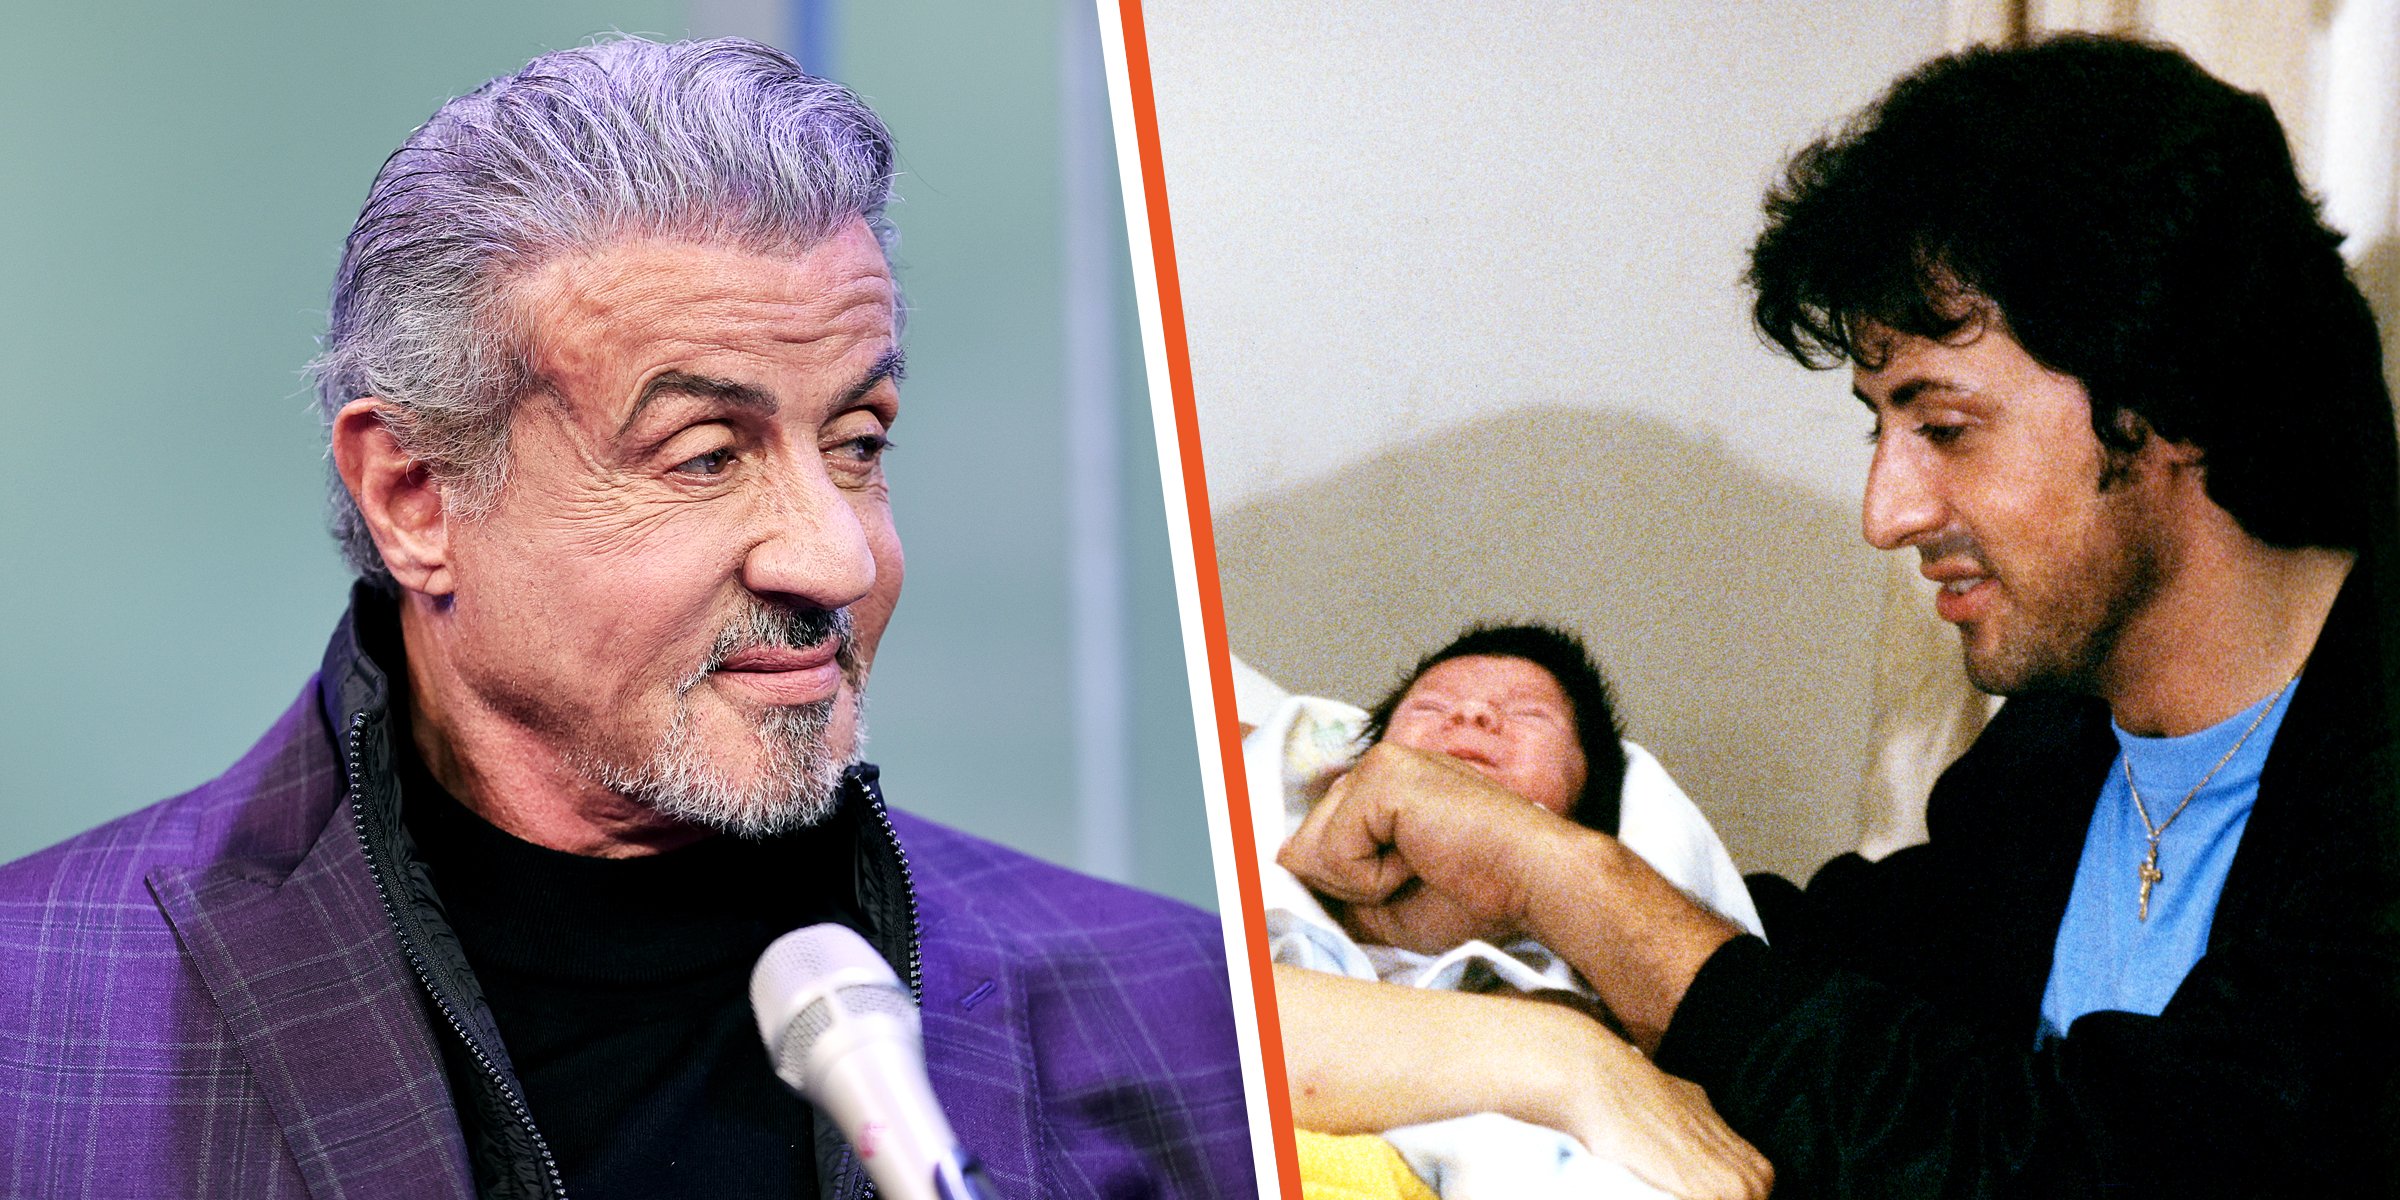 Sylvester Stallone┃Seargeoh y Sylvester Stallone┃Foto: Getty Images